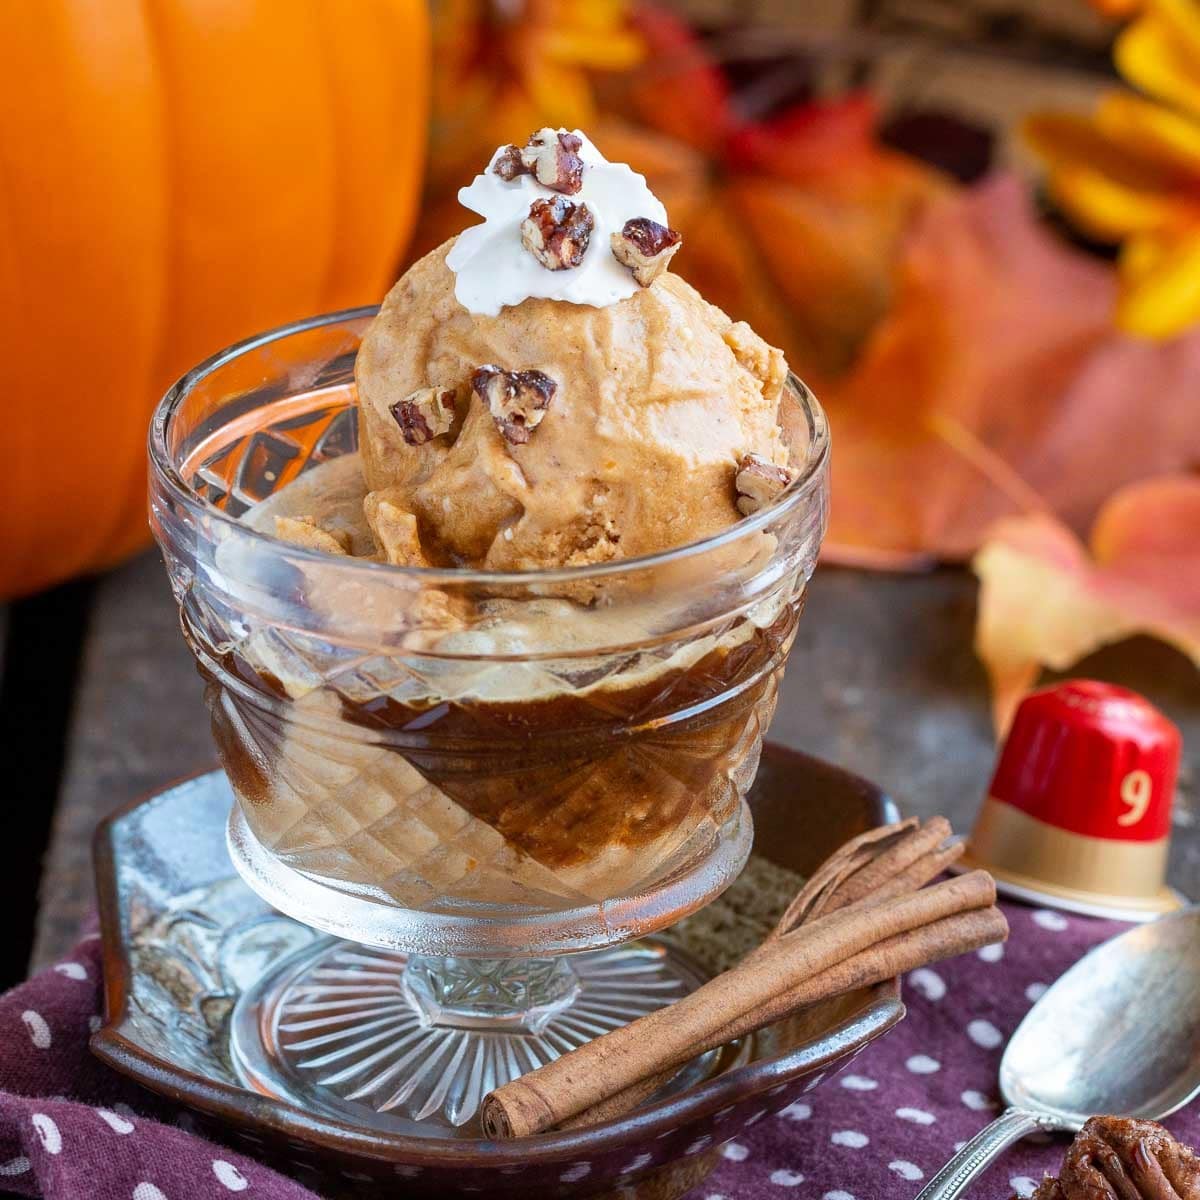 Dairy free pumpkin ice cream affogato in a glass vintage cup topped with coconut topping and crushed pecans.